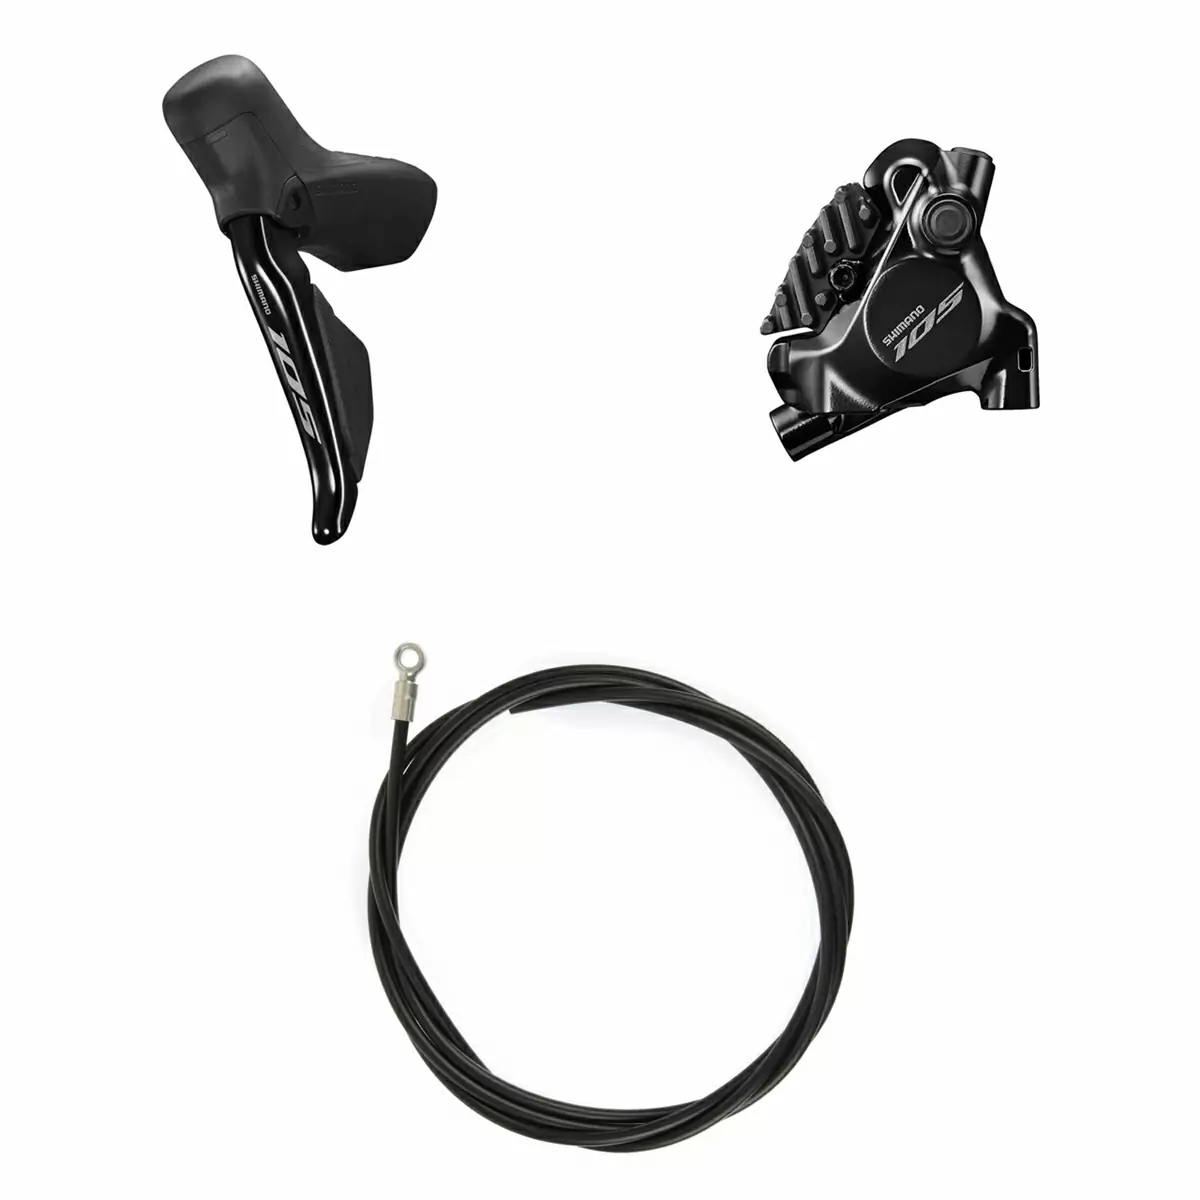 Front control kit 105 Di2 ST-R7170 / BR-R7170 2x12s - image